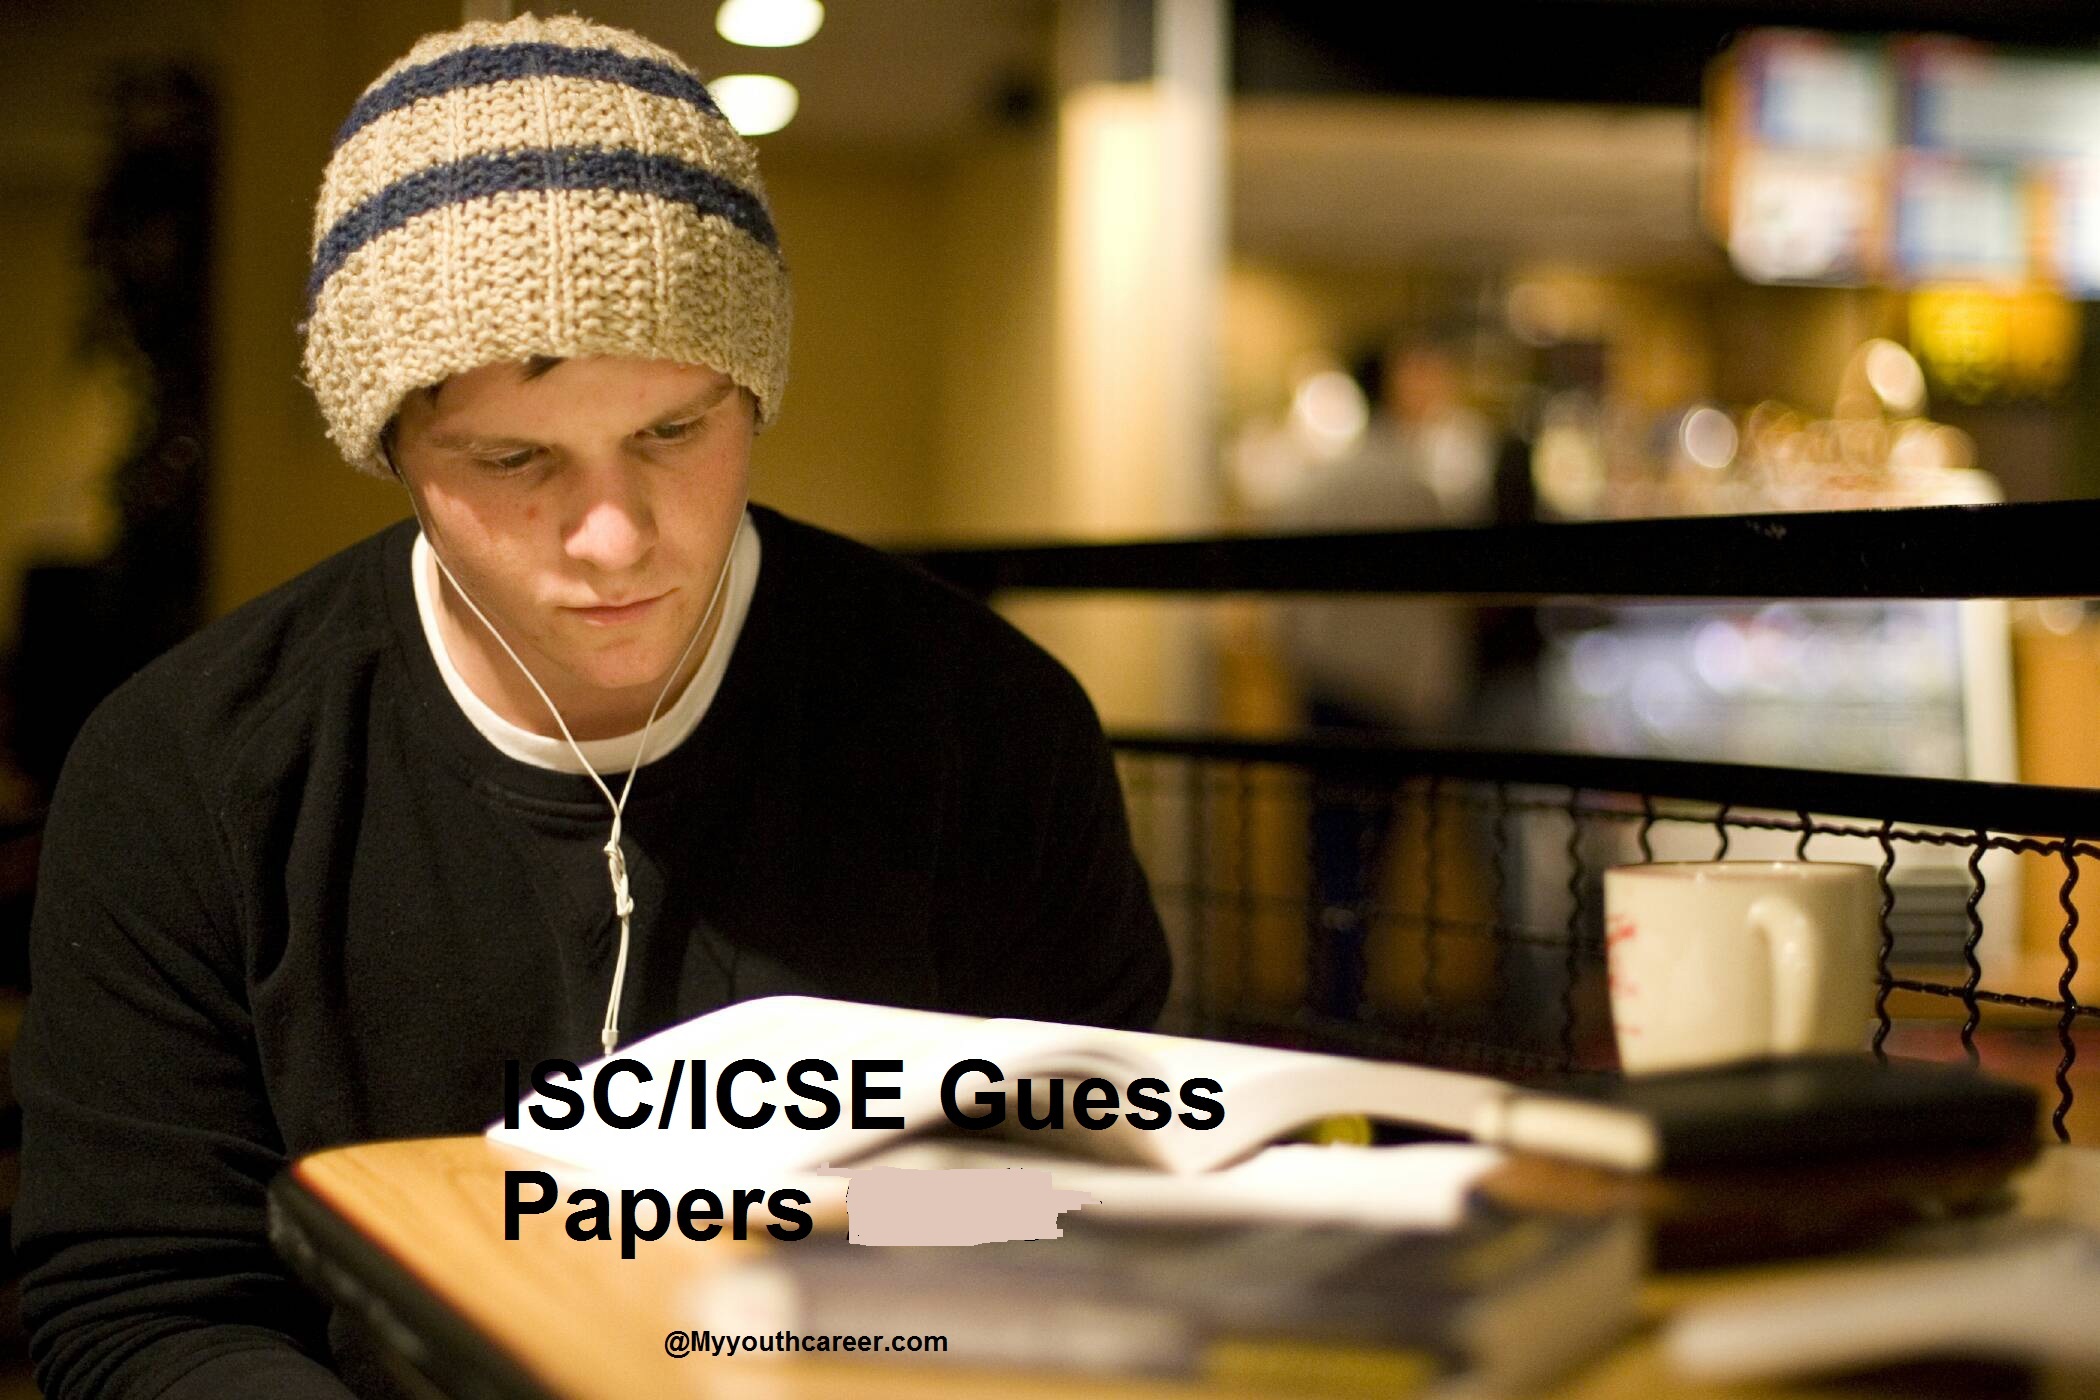 ISC exams 2021 Sample Papers, ISC Board Exams 2021,Sample papers for ISC Exams 2021,ICSE 2021 Exams Sample papers,ISC 2021 exam Guess papers